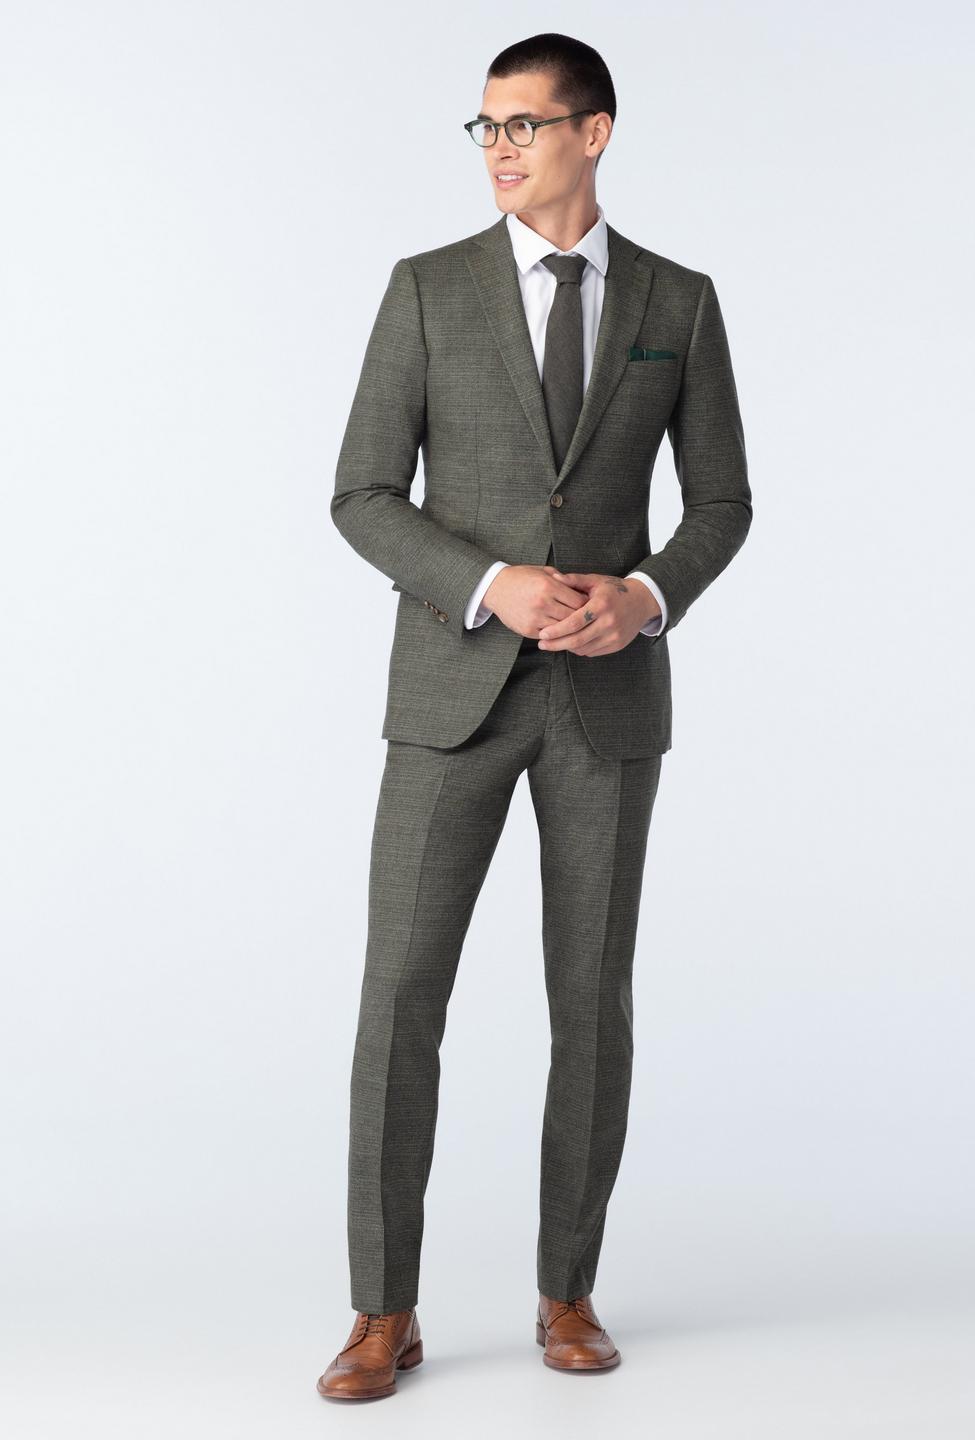 Olive suit - Monza Solid Design from Indochino Collection